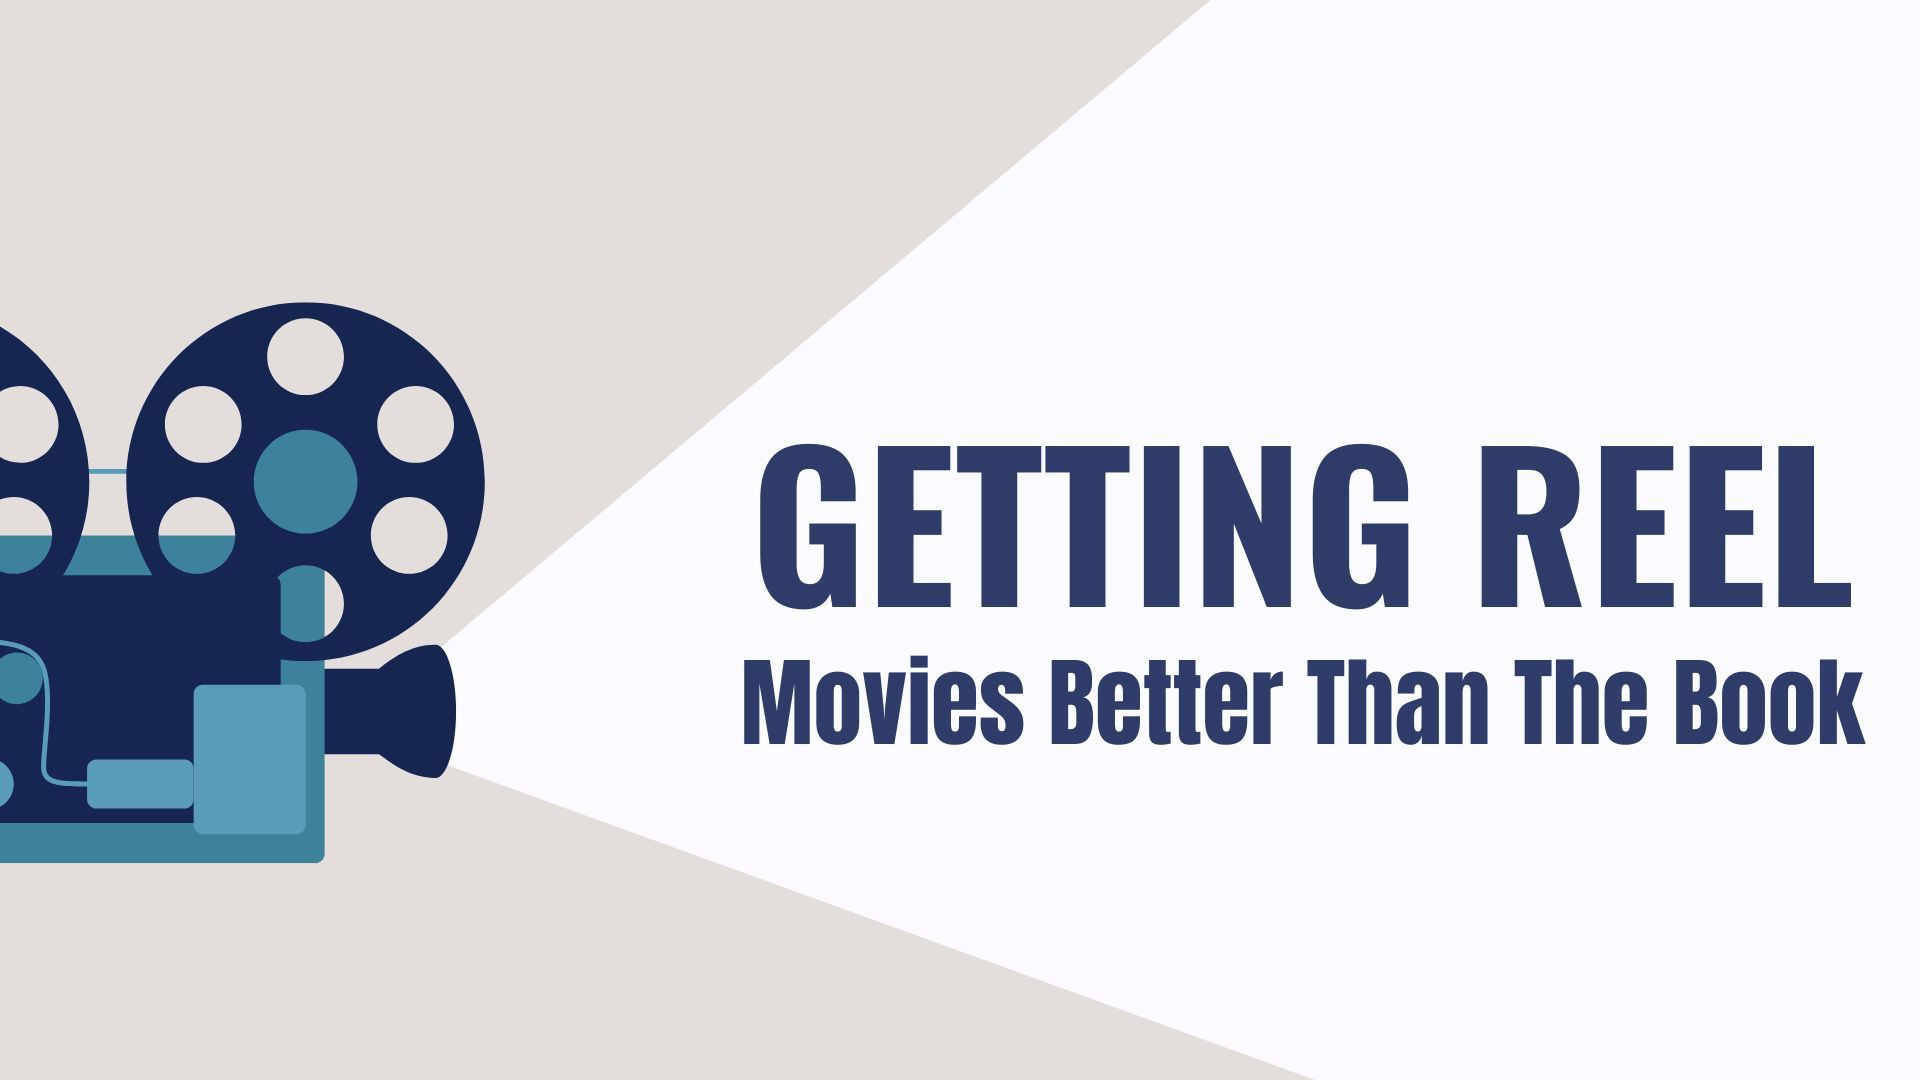 KTHV movie reviewers discuss the movies that are better than the book, including Shutter Island and Gone Girl. Plus, which Harry Potter movie beats the book.